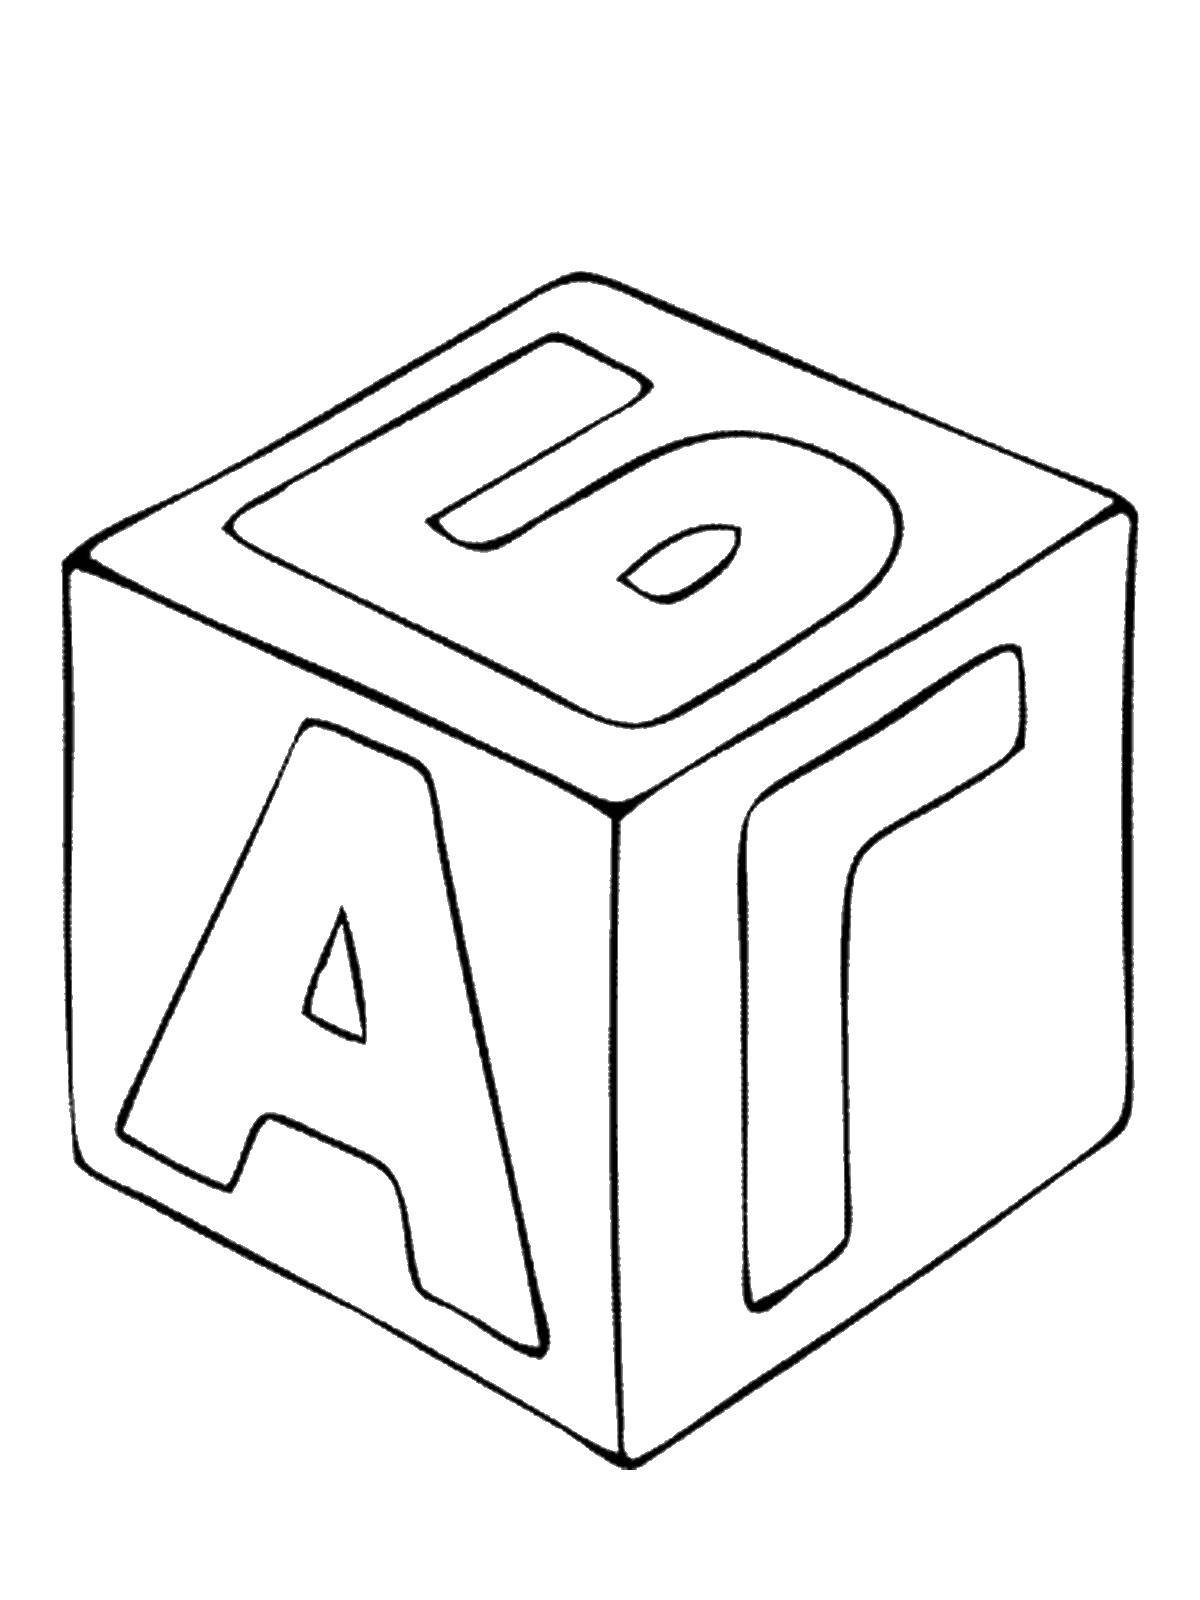 Coloring Cube with letters. Category toys. Tags:  Kubik , letters, alphabet.